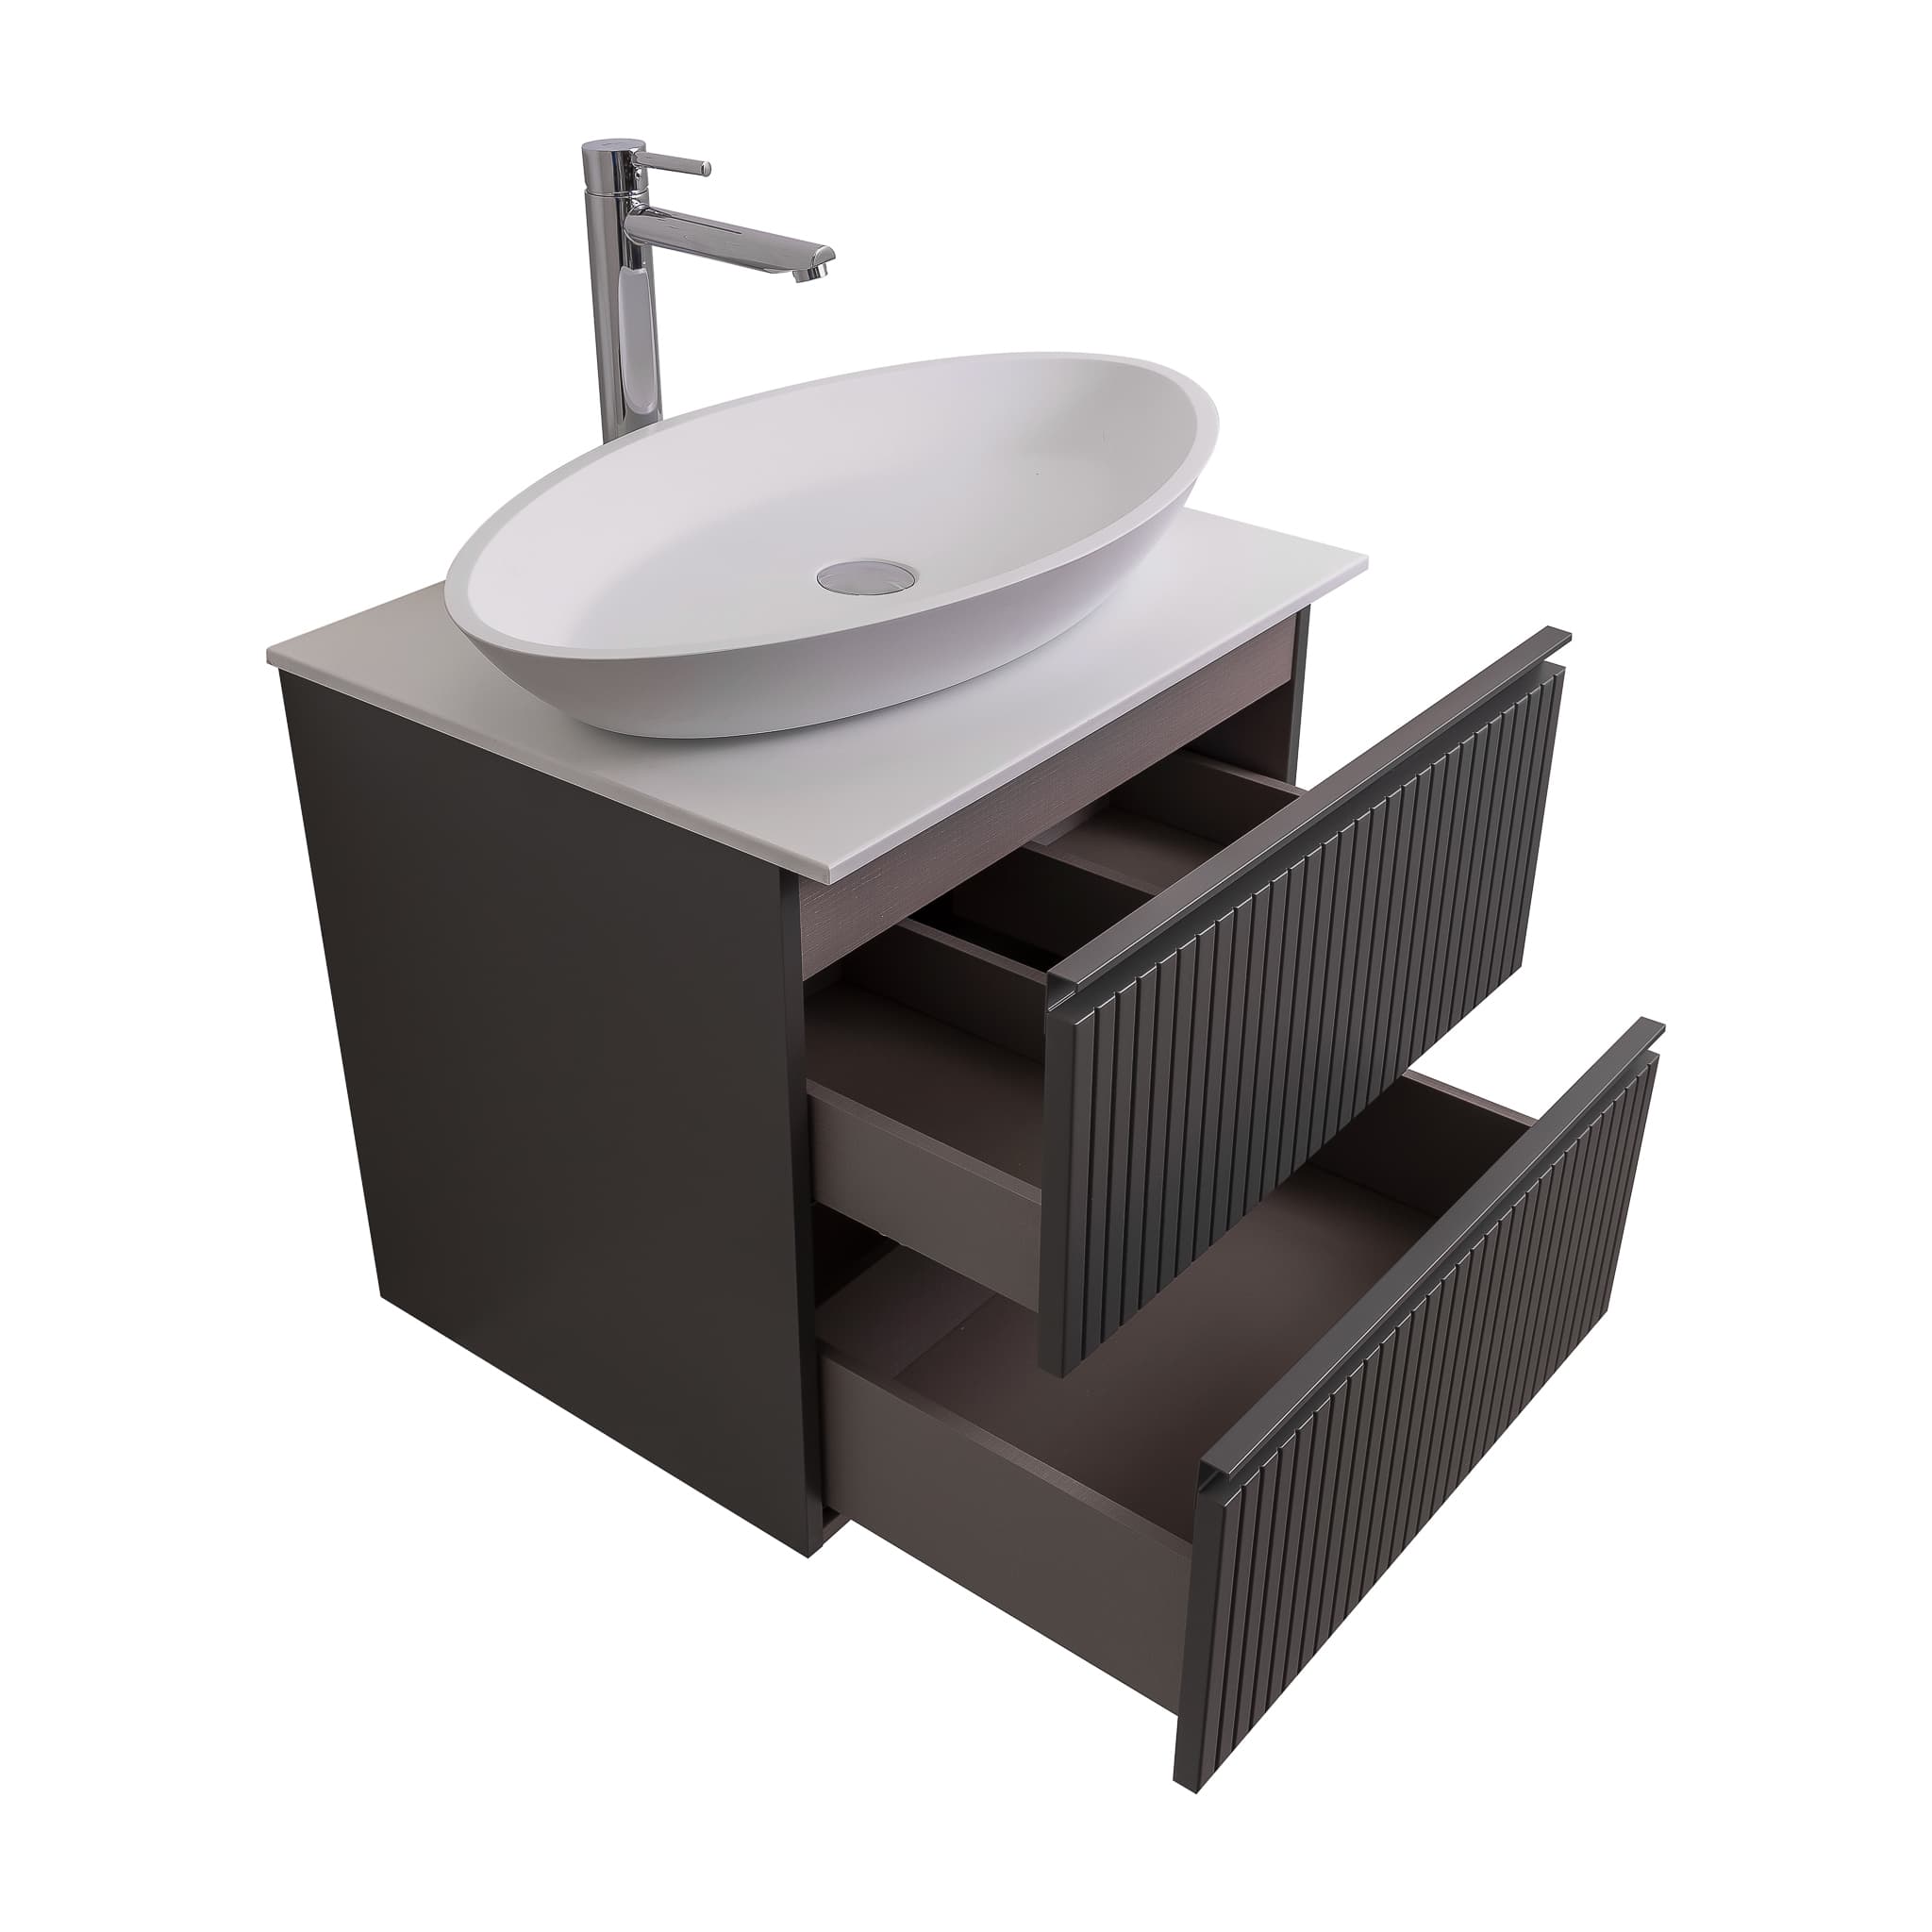 Ares 23.5 Matte Grey Cabinet, Solid Surface Flat White Counter And Oval Solid Surface White Basin 1305, Wall Mounted Modern Vanity Set